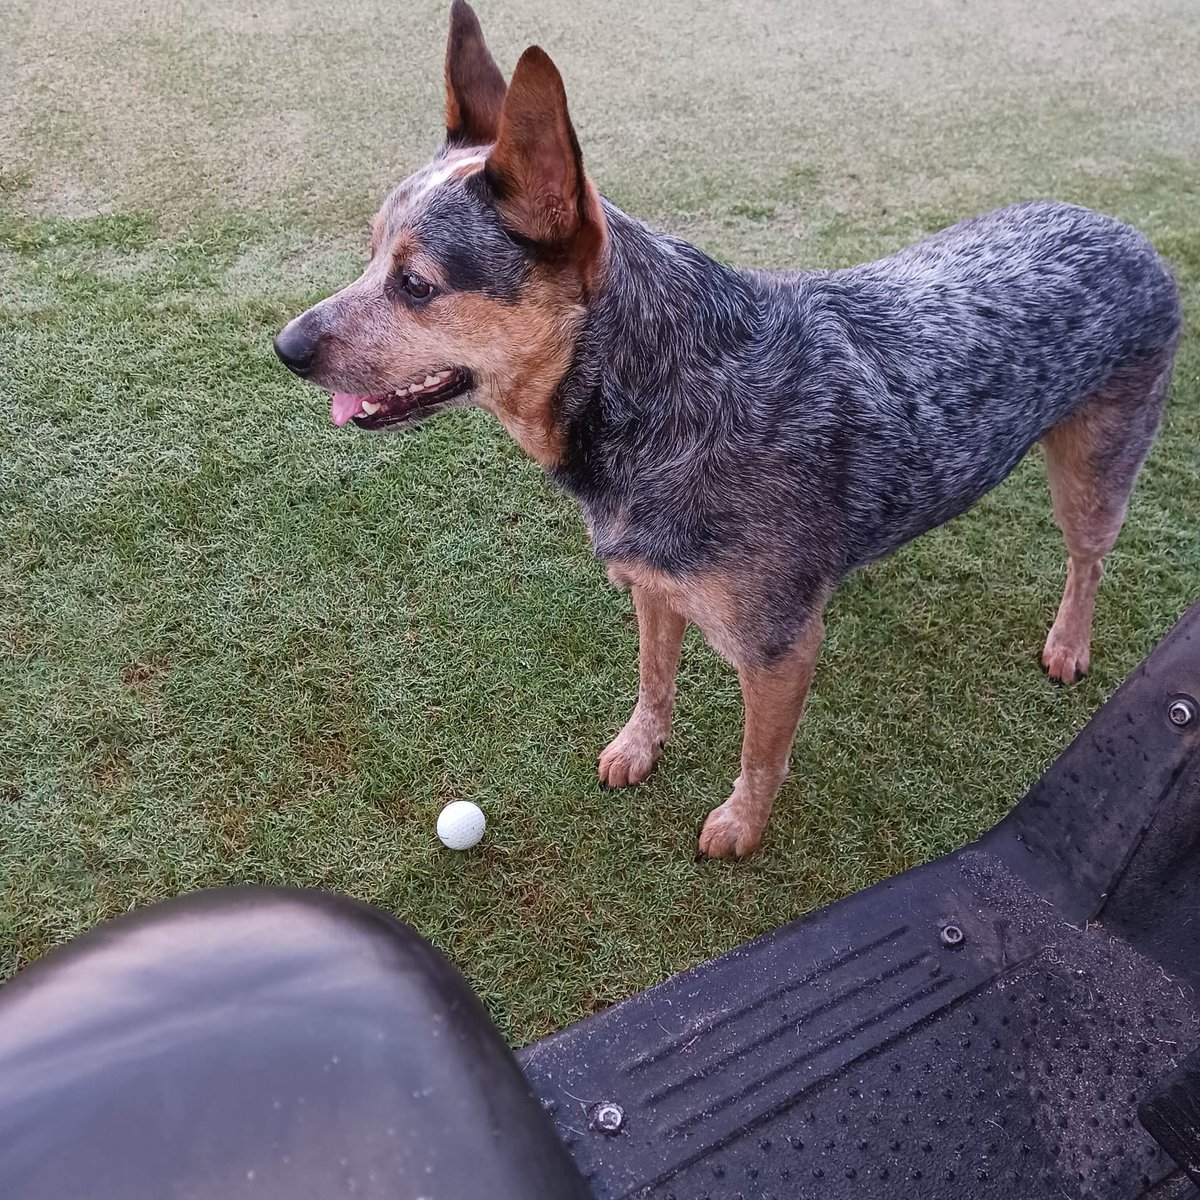 His 1st day on the course. Took some getting use too, The cart was scary the dark was scary and now he's a pro at it. #Dogsofturf #Turfdog